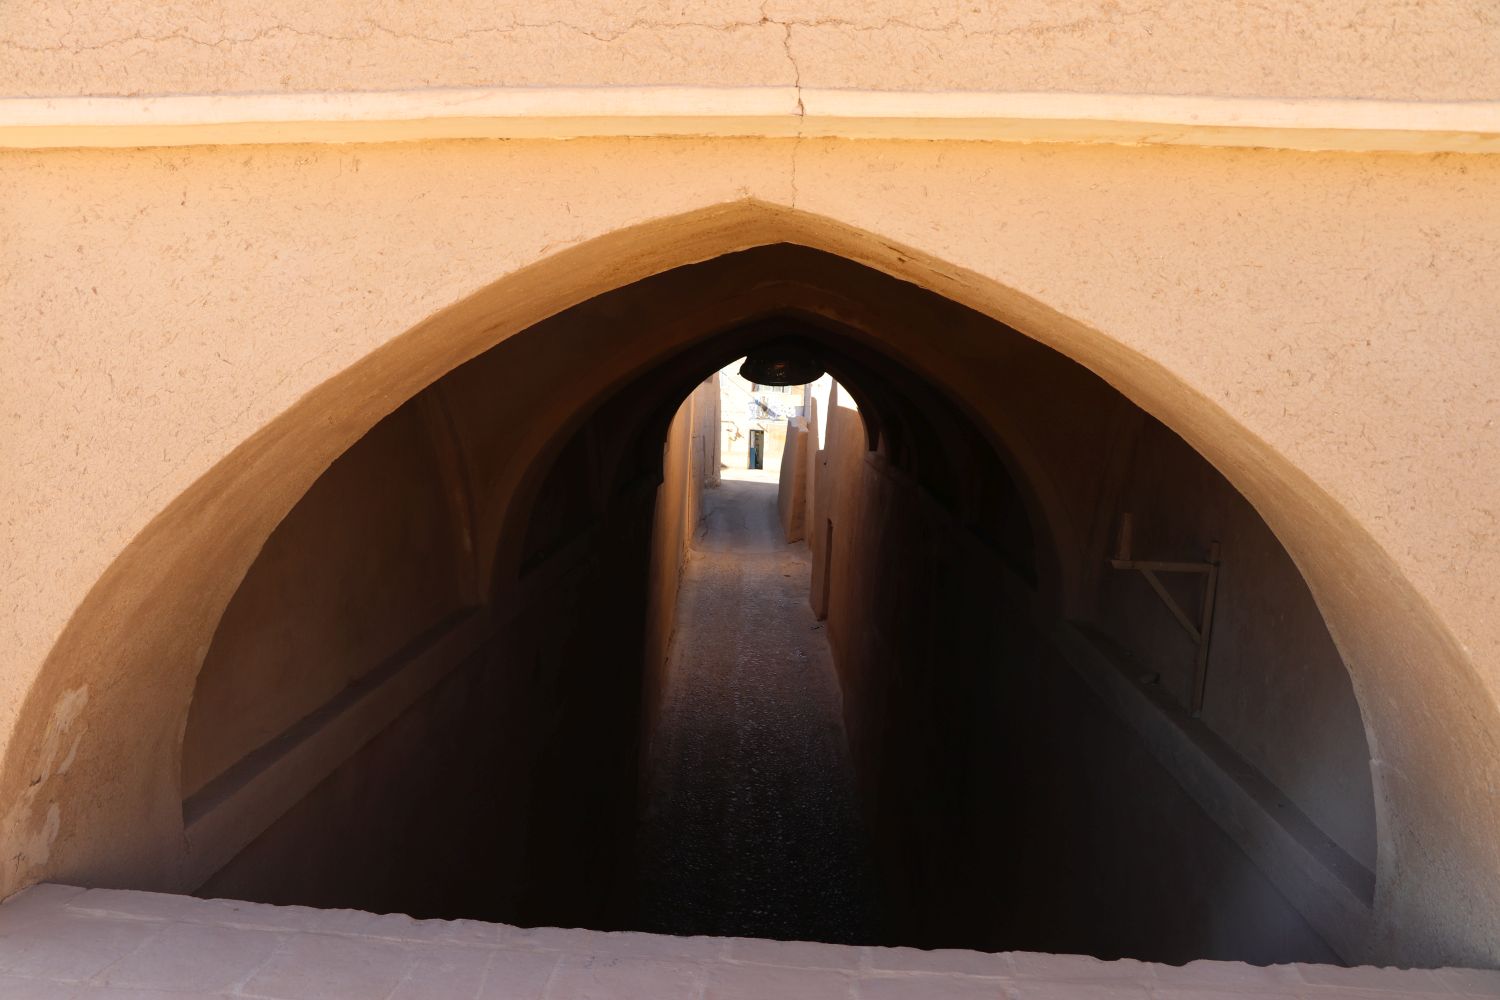 View of passageway from roof.